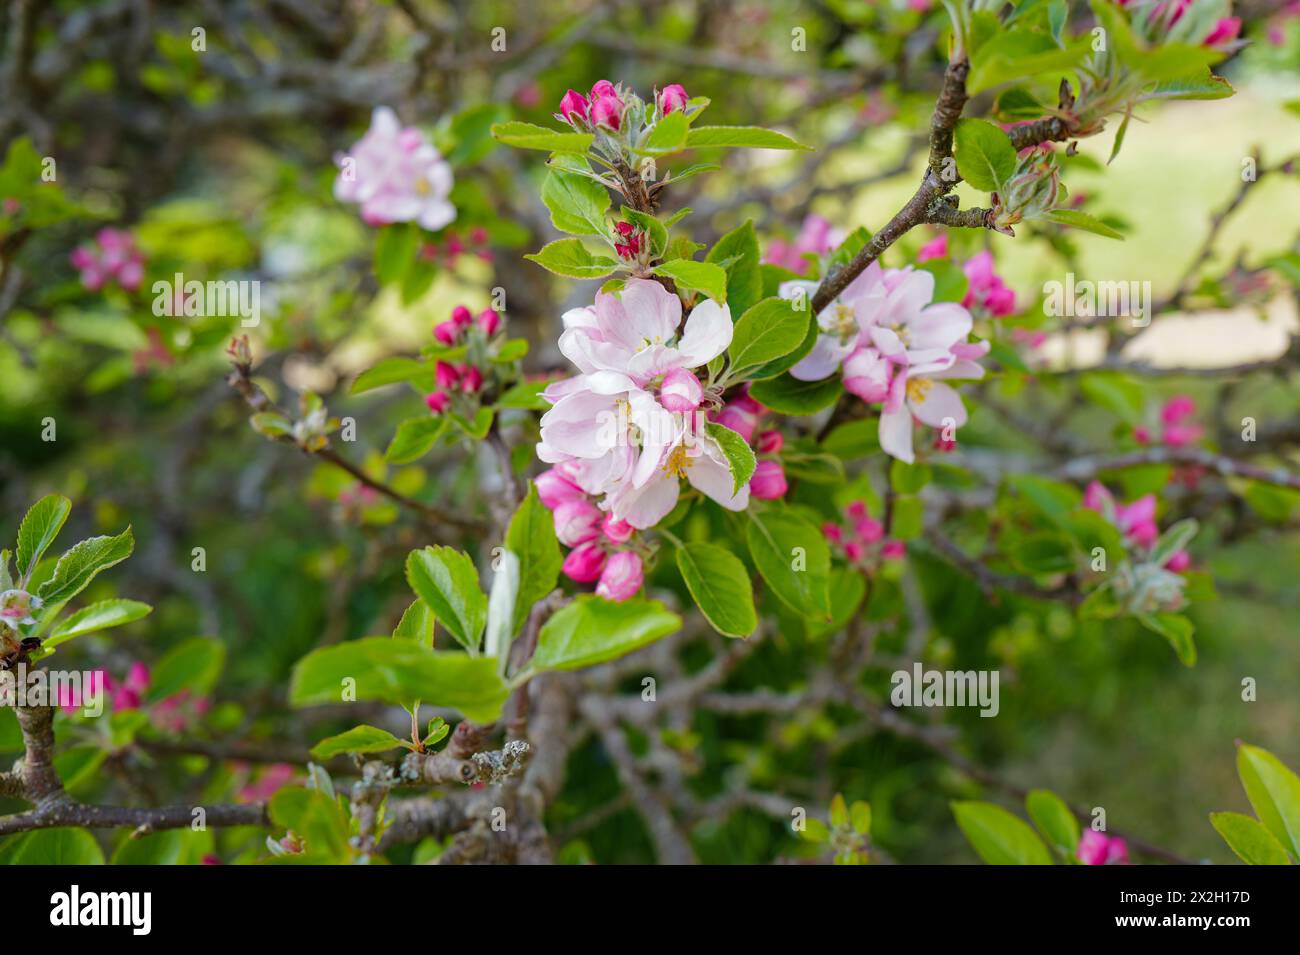 Apple blossom on apple trees in a private garden that was once an apple orchard in Devon, England, UK. Stock Photo